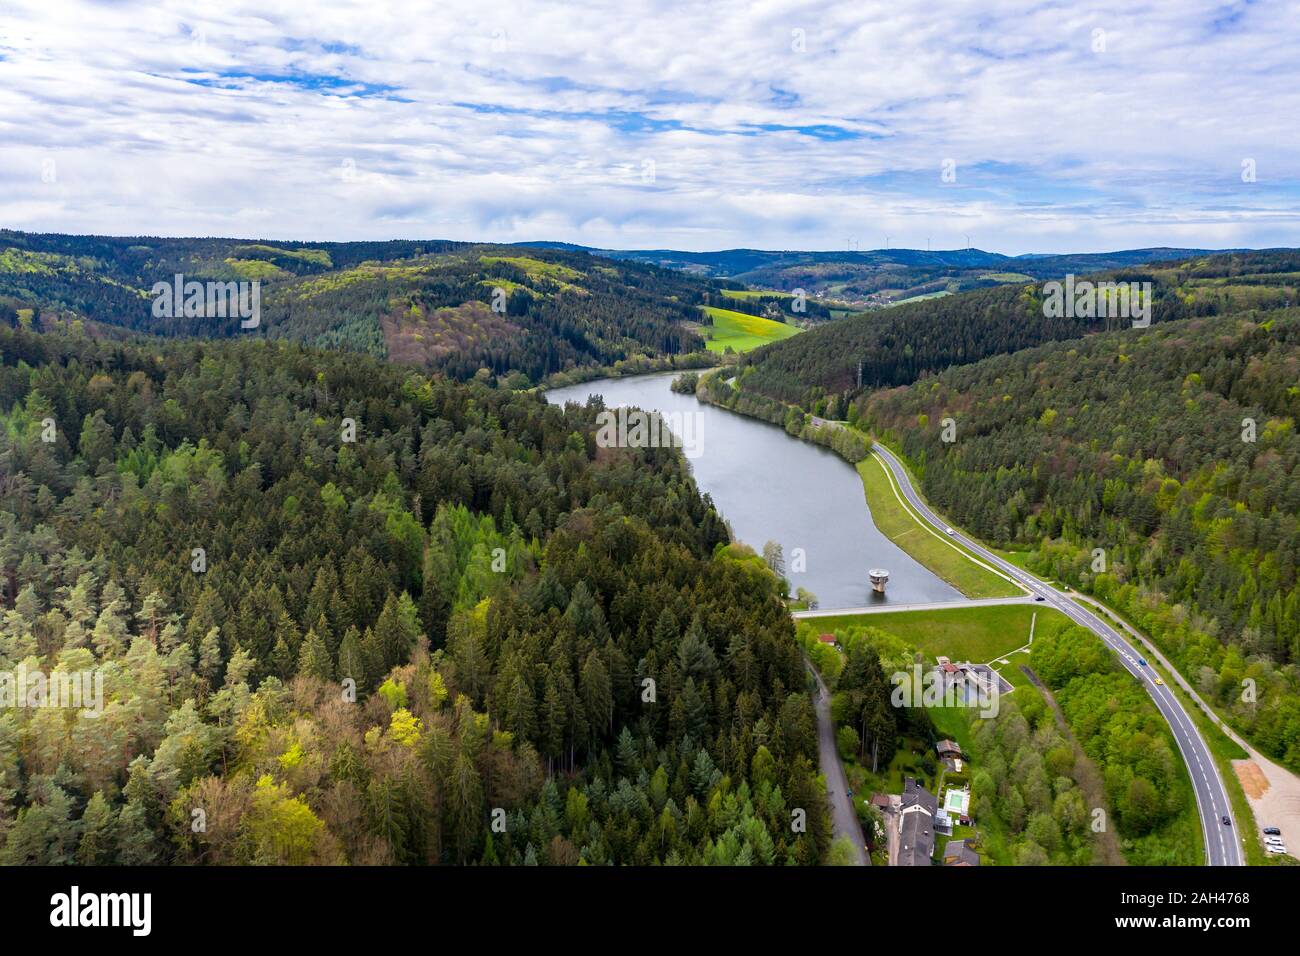 Germany, Hesse, Erbach, Scenic view of Marbach reservoir in Himbachel Valley Stock Photo